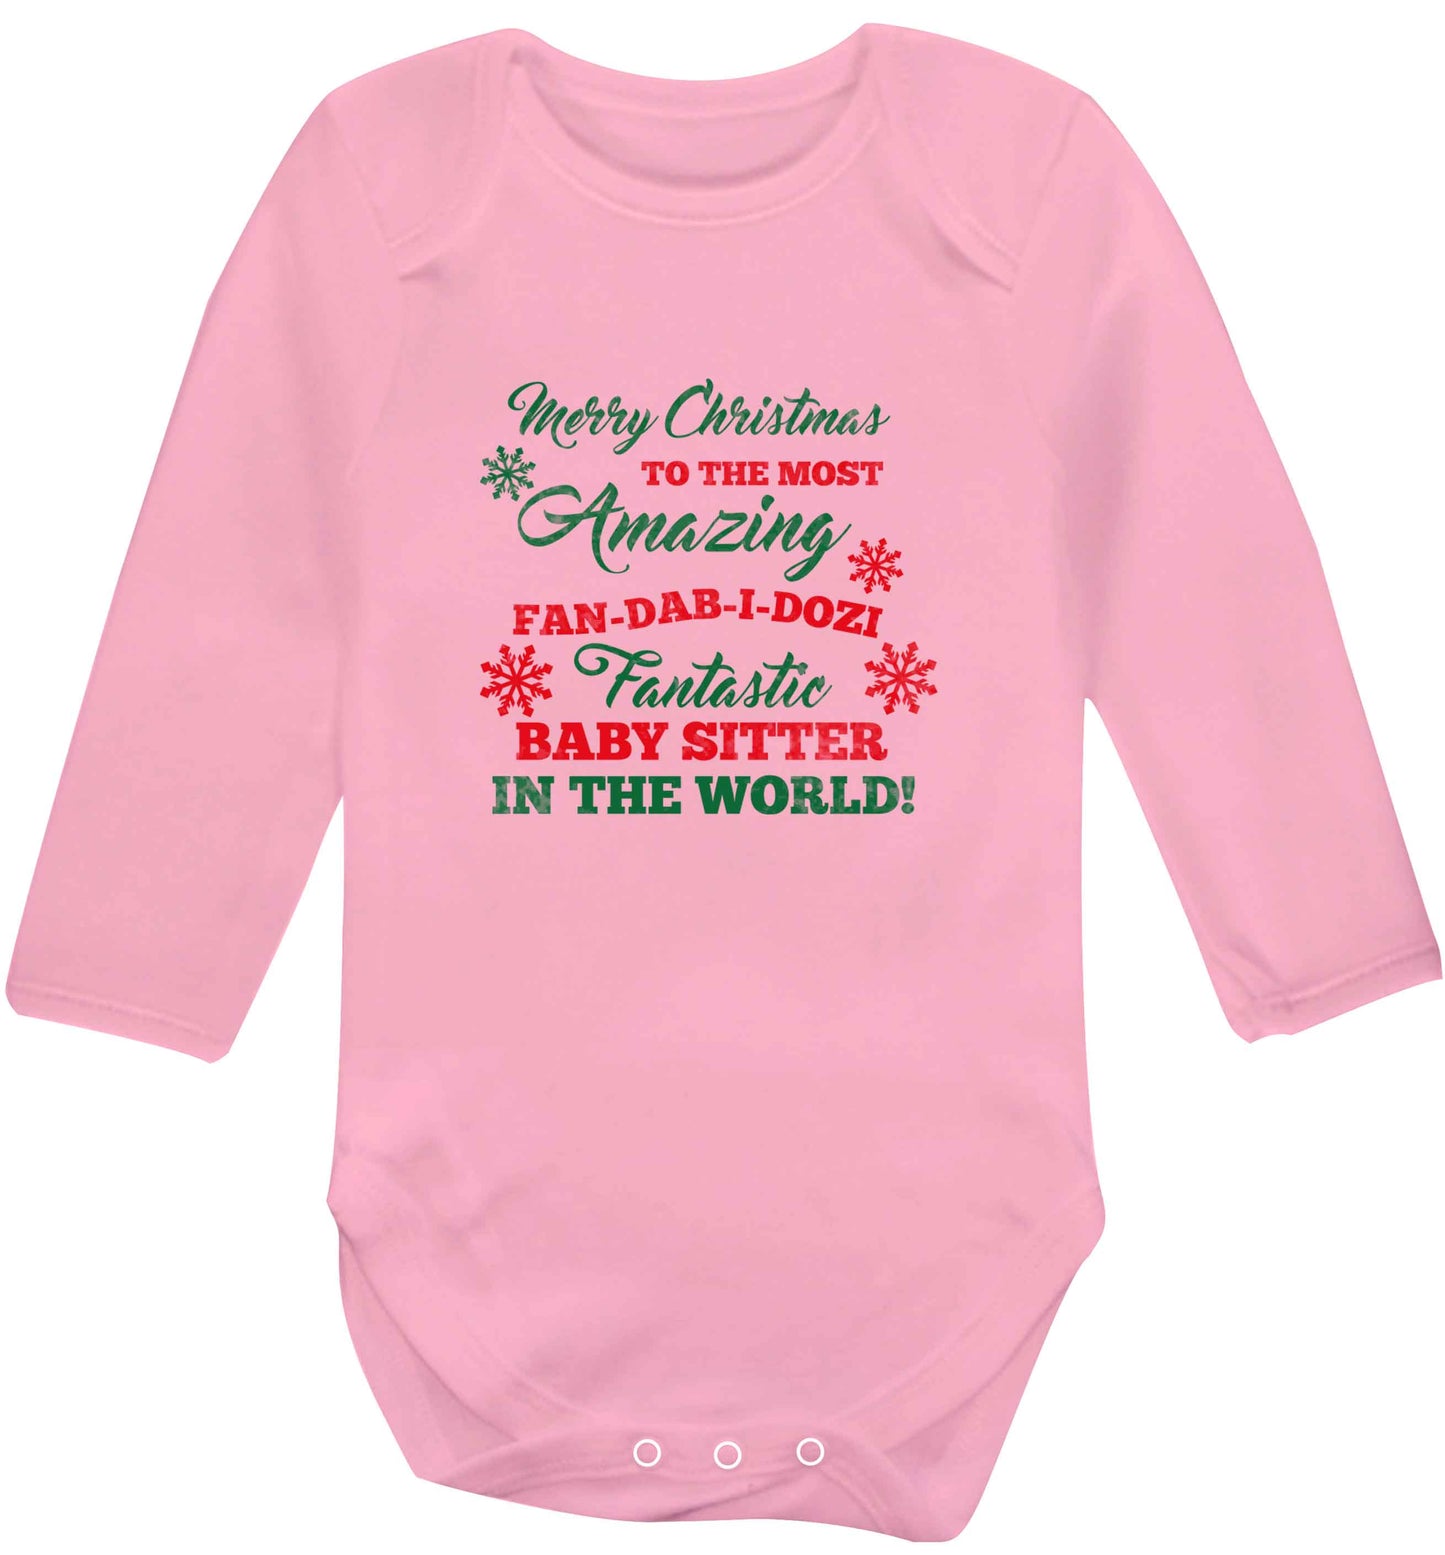 Merry Christmas to the most amazing fan-dab-i-dozi fantasic baby sitter in the world baby vest long sleeved pale pink 6-12 months